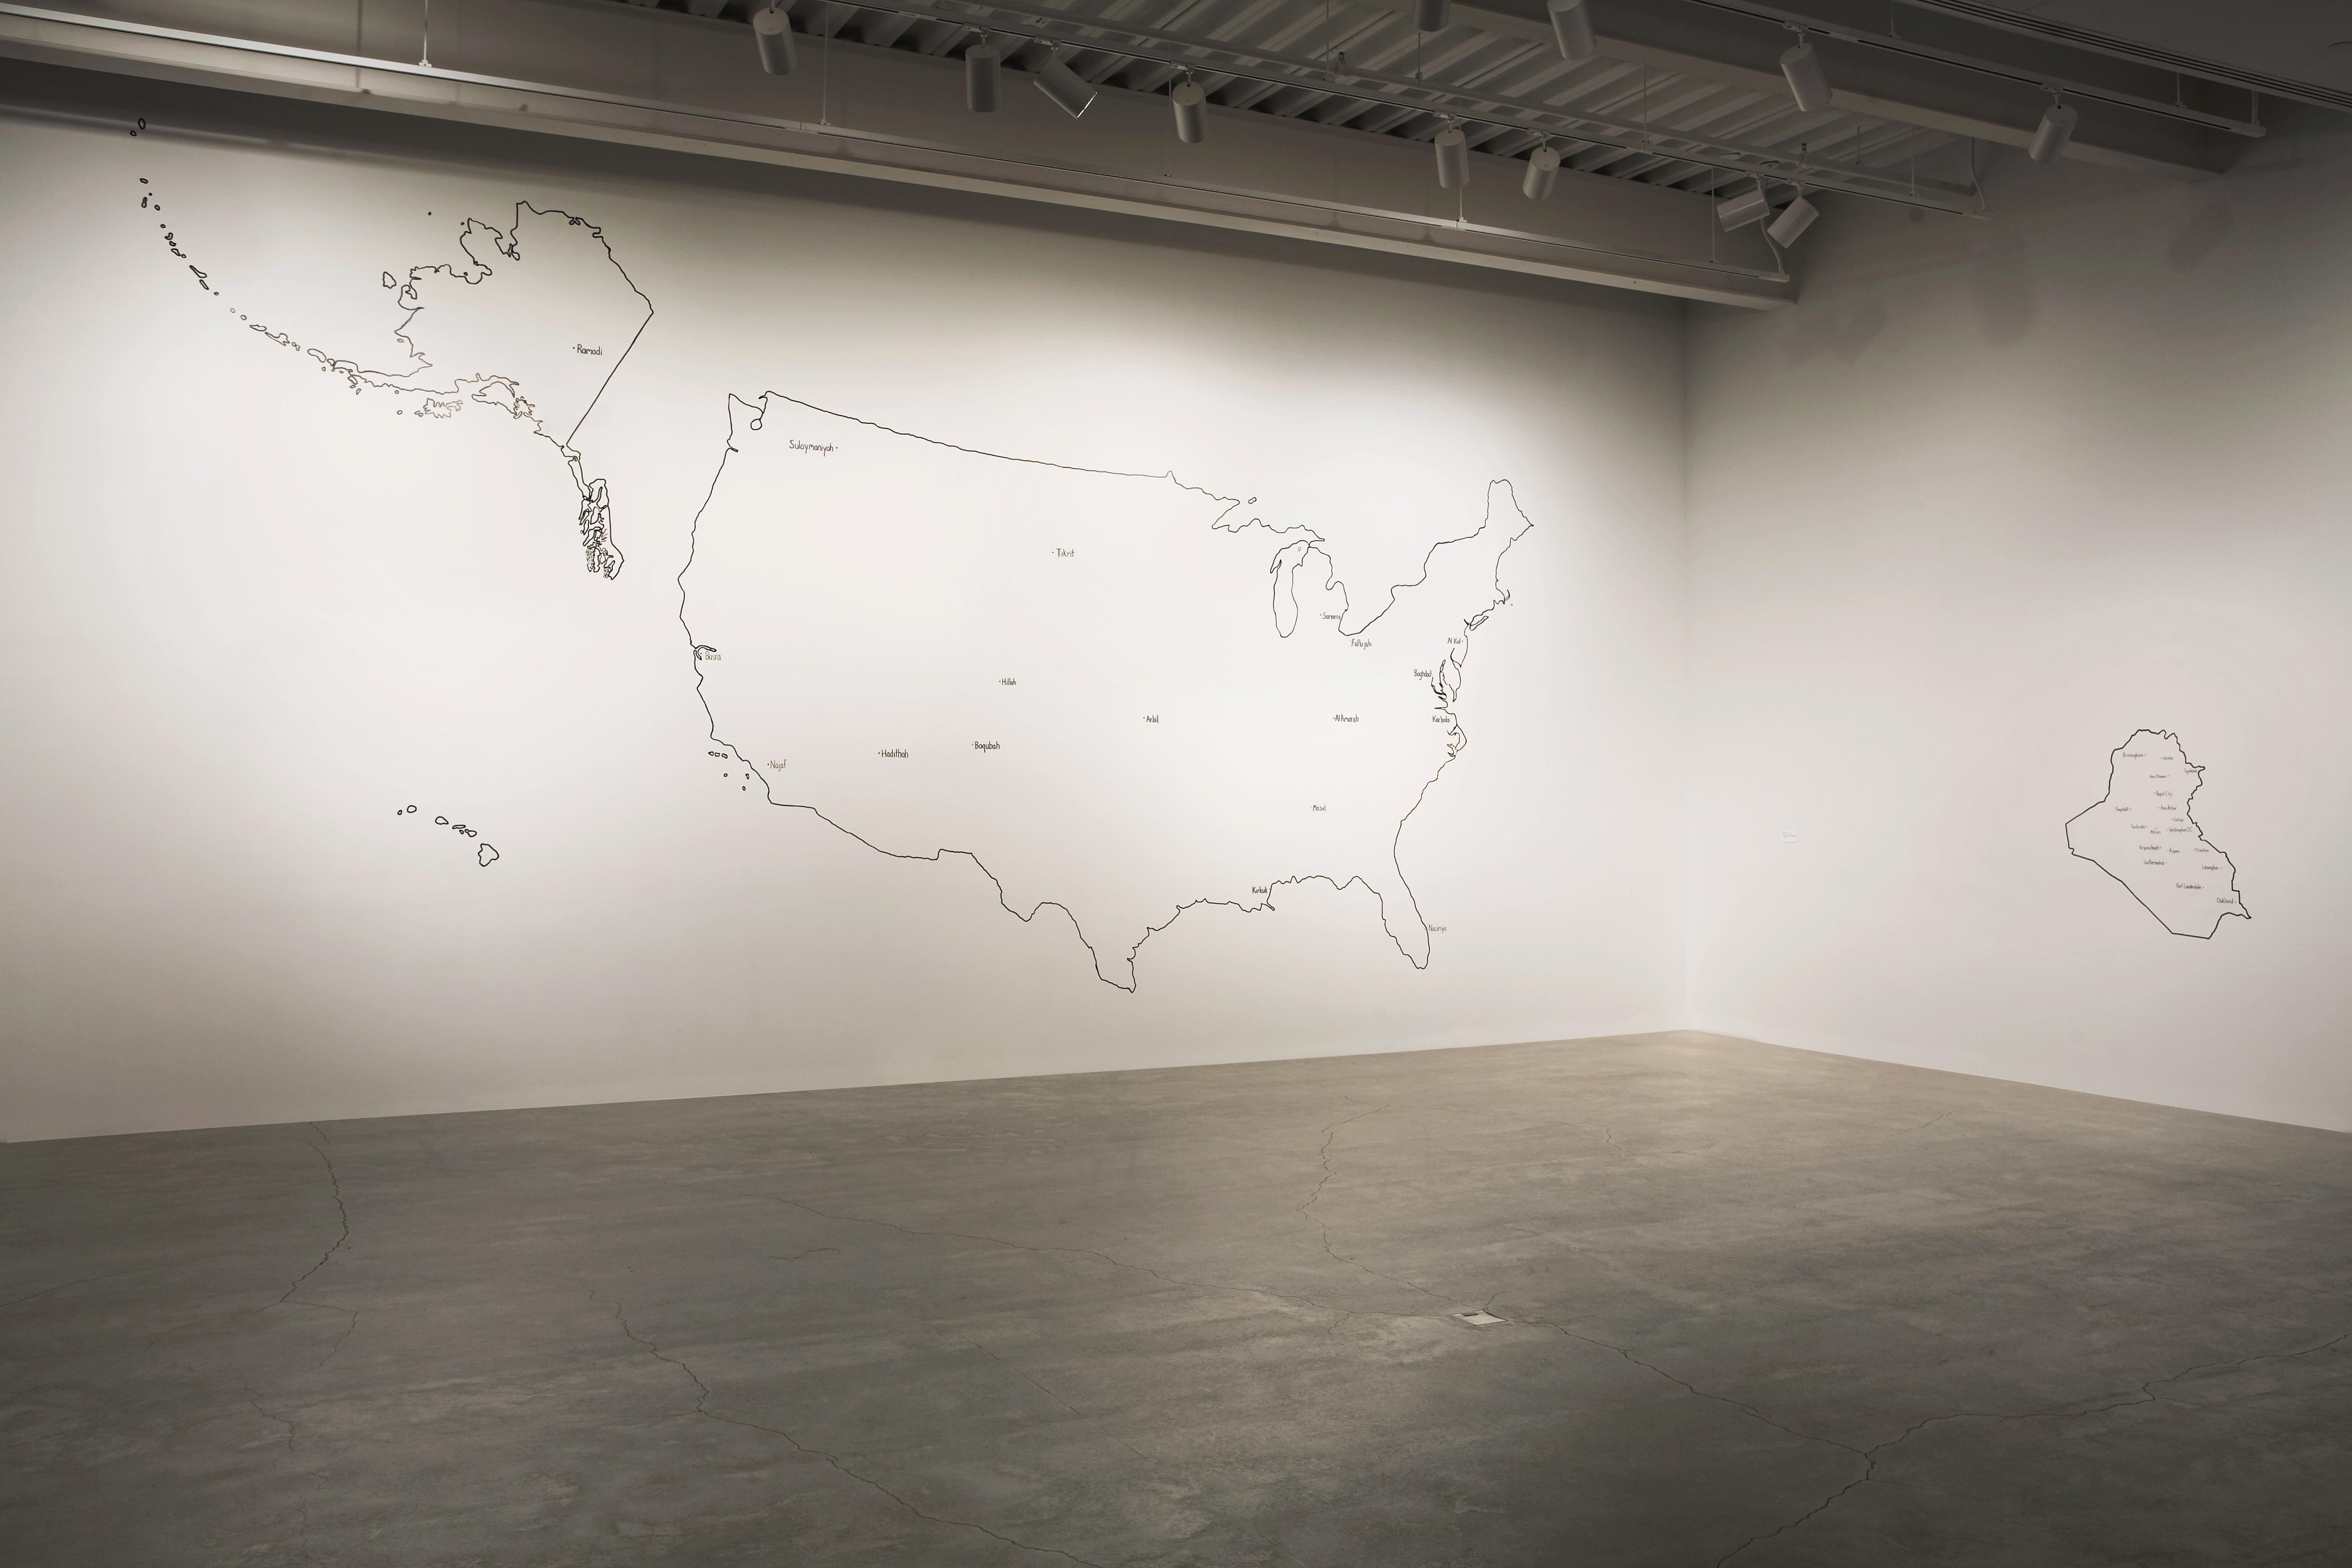 On a vast white wall, a map of the United States is outlined in black while a map of Iraq is outlined in black on a large white wall to its left.